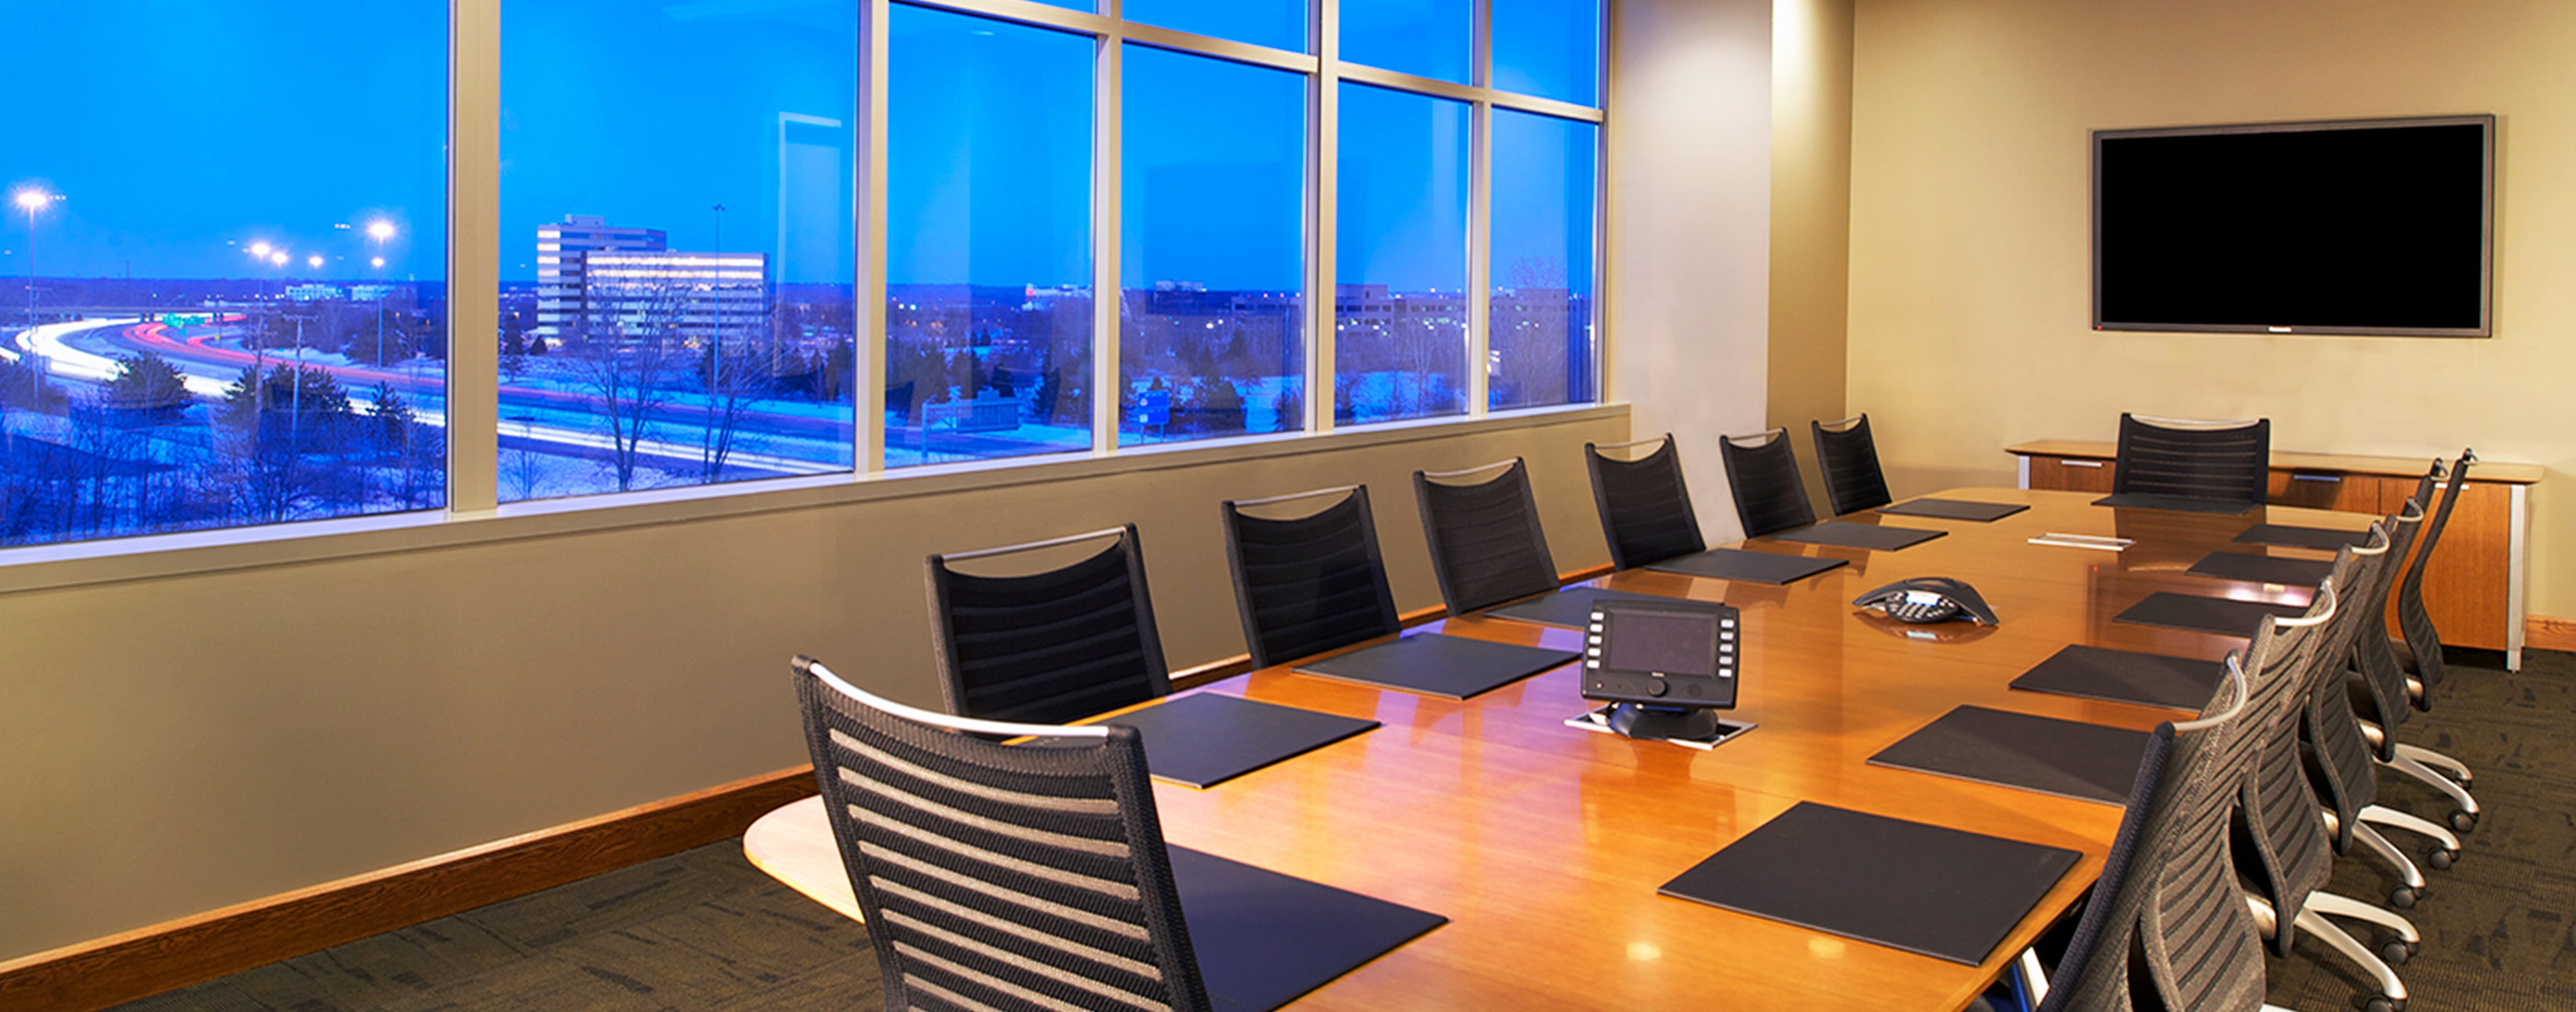 Conference room inside IGS Energy's LEED-NC corporate headquarters building.